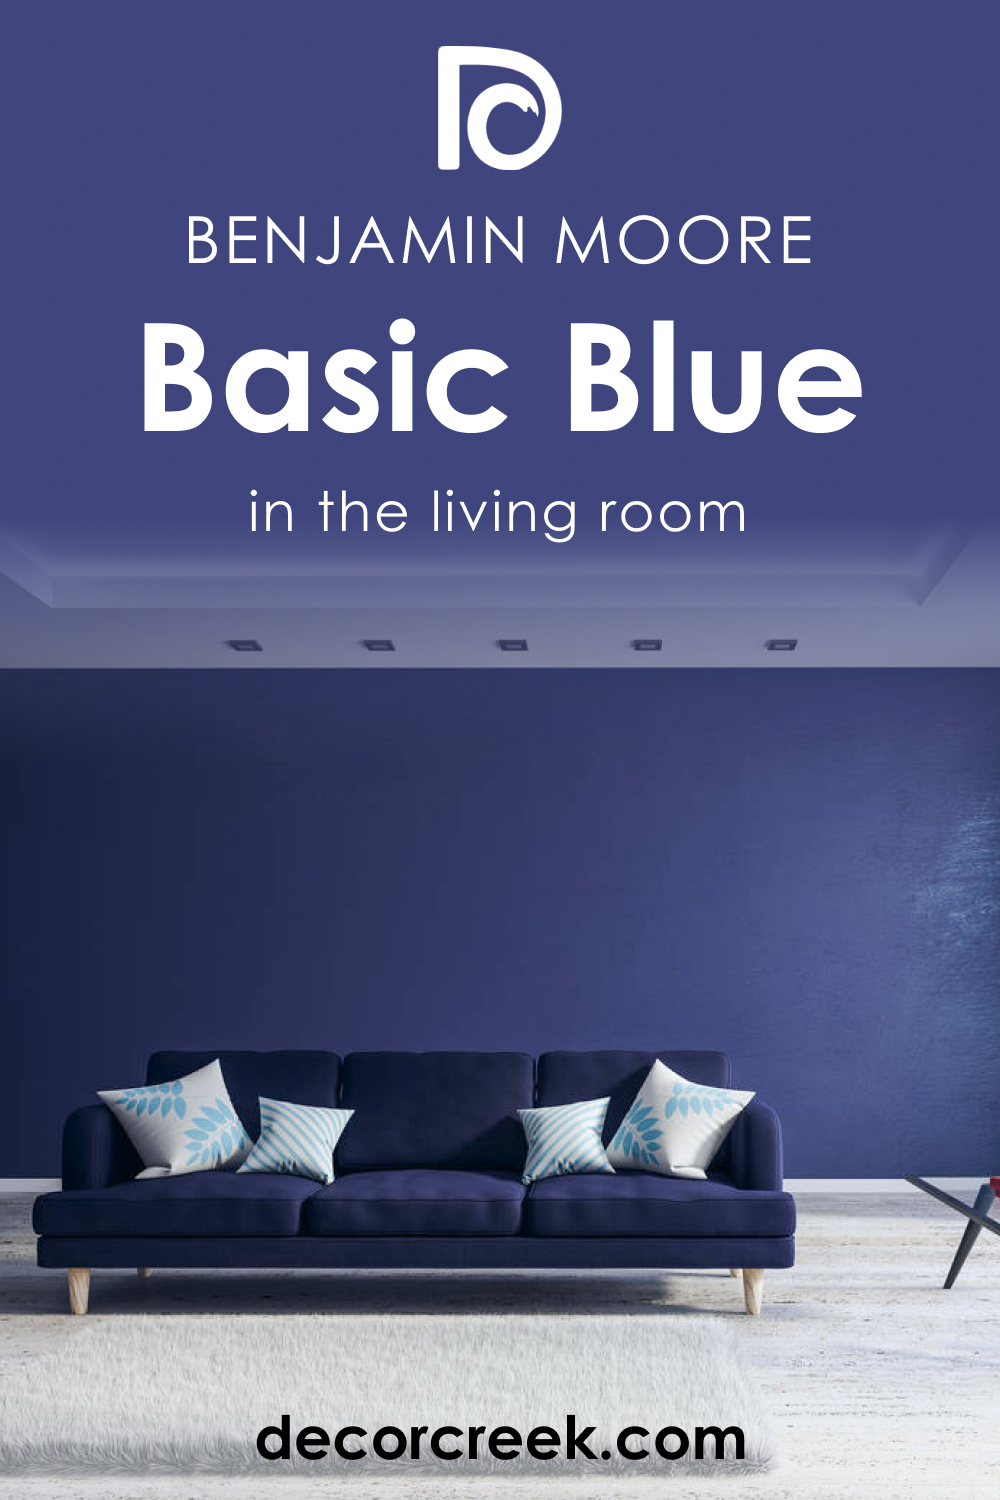 How to Use Basic Blue CC-968 in the Living Room?